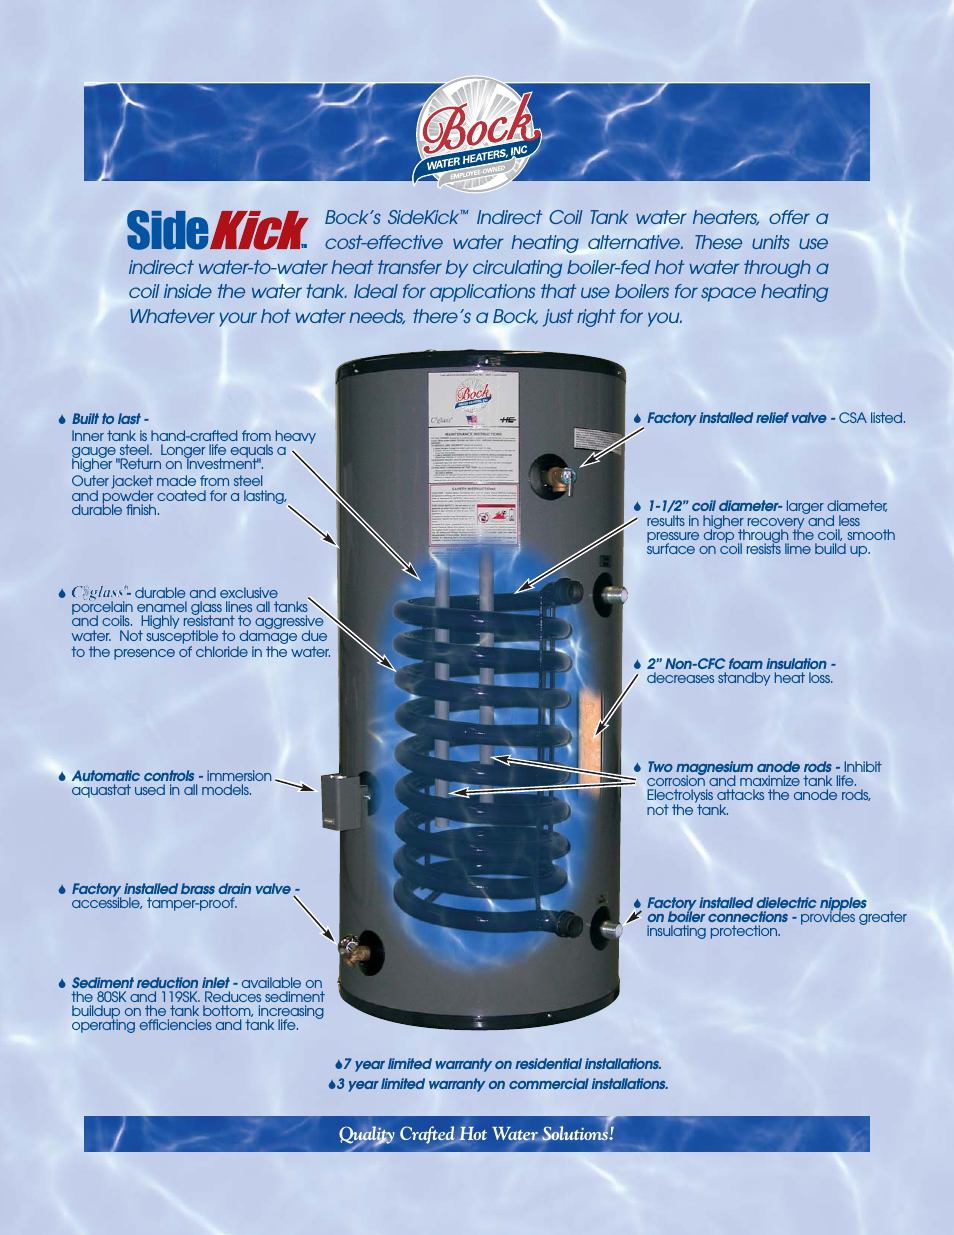 Indirect Coil Tank Water Heater